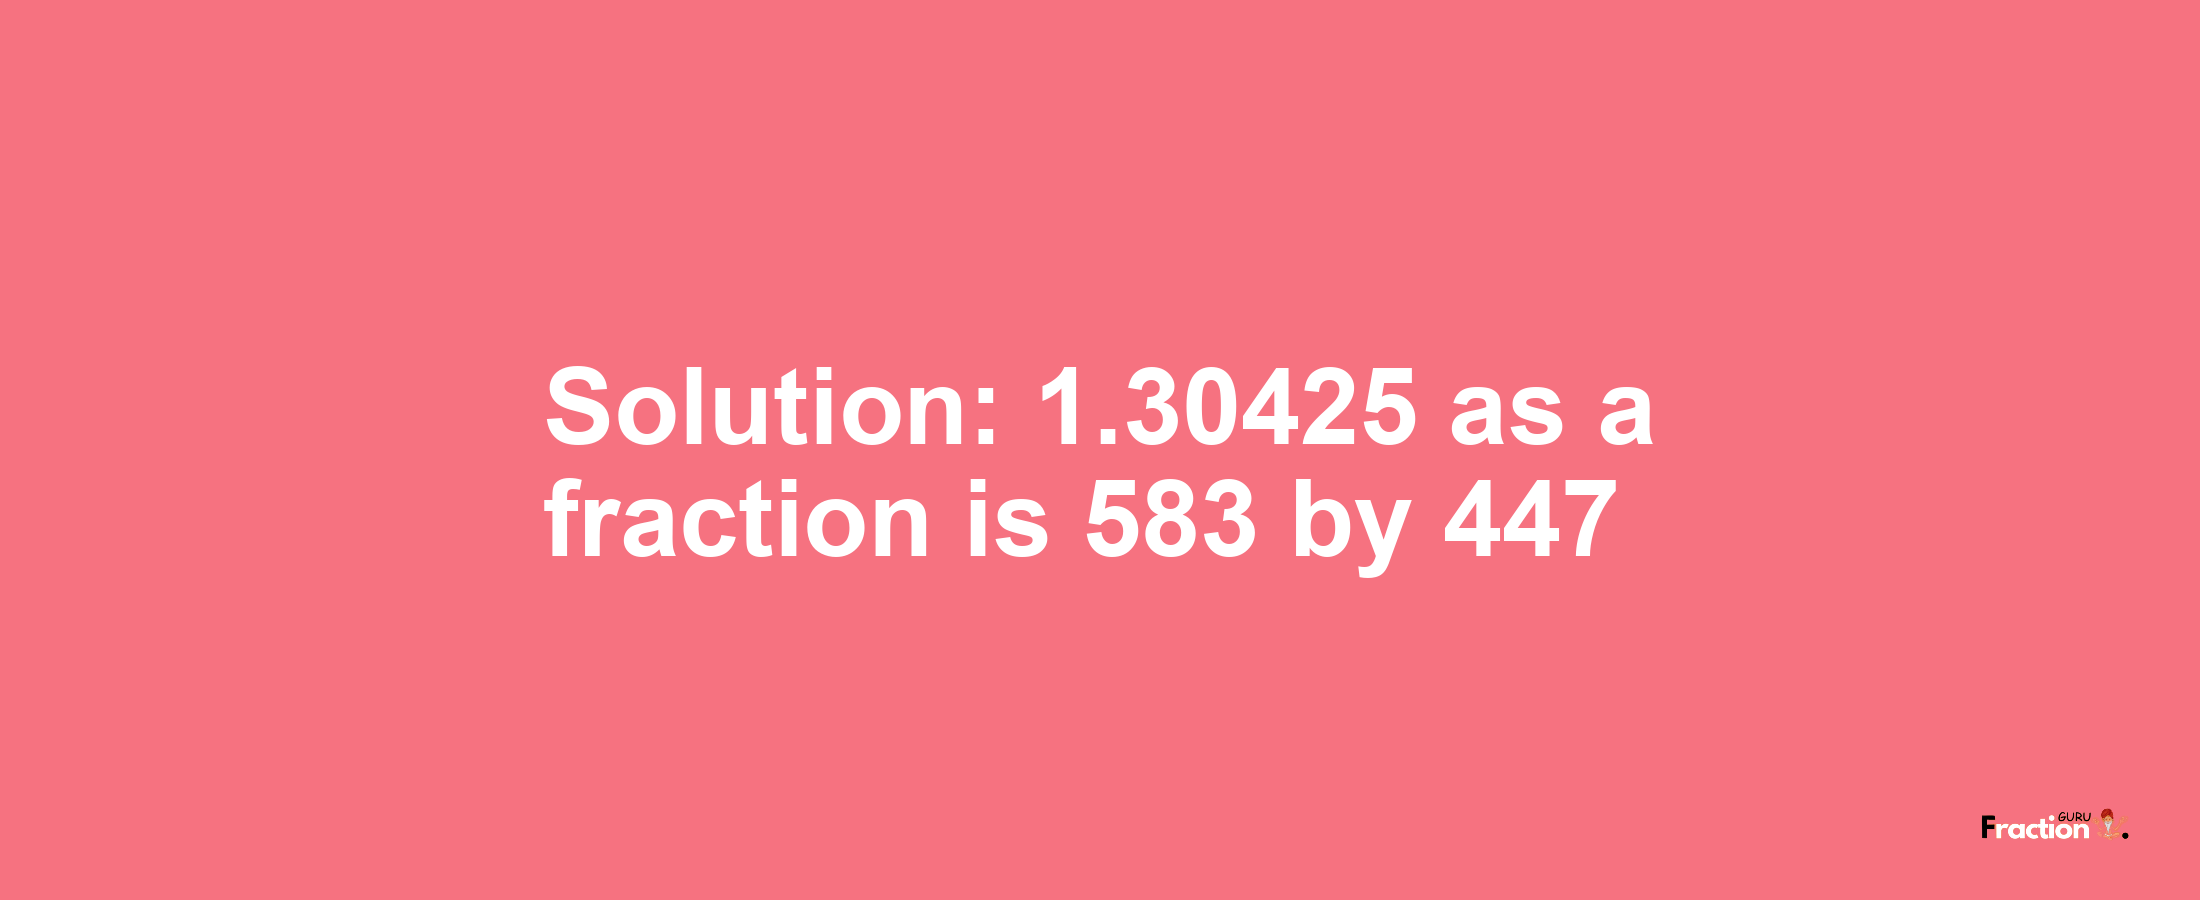 Solution:1.30425 as a fraction is 583/447